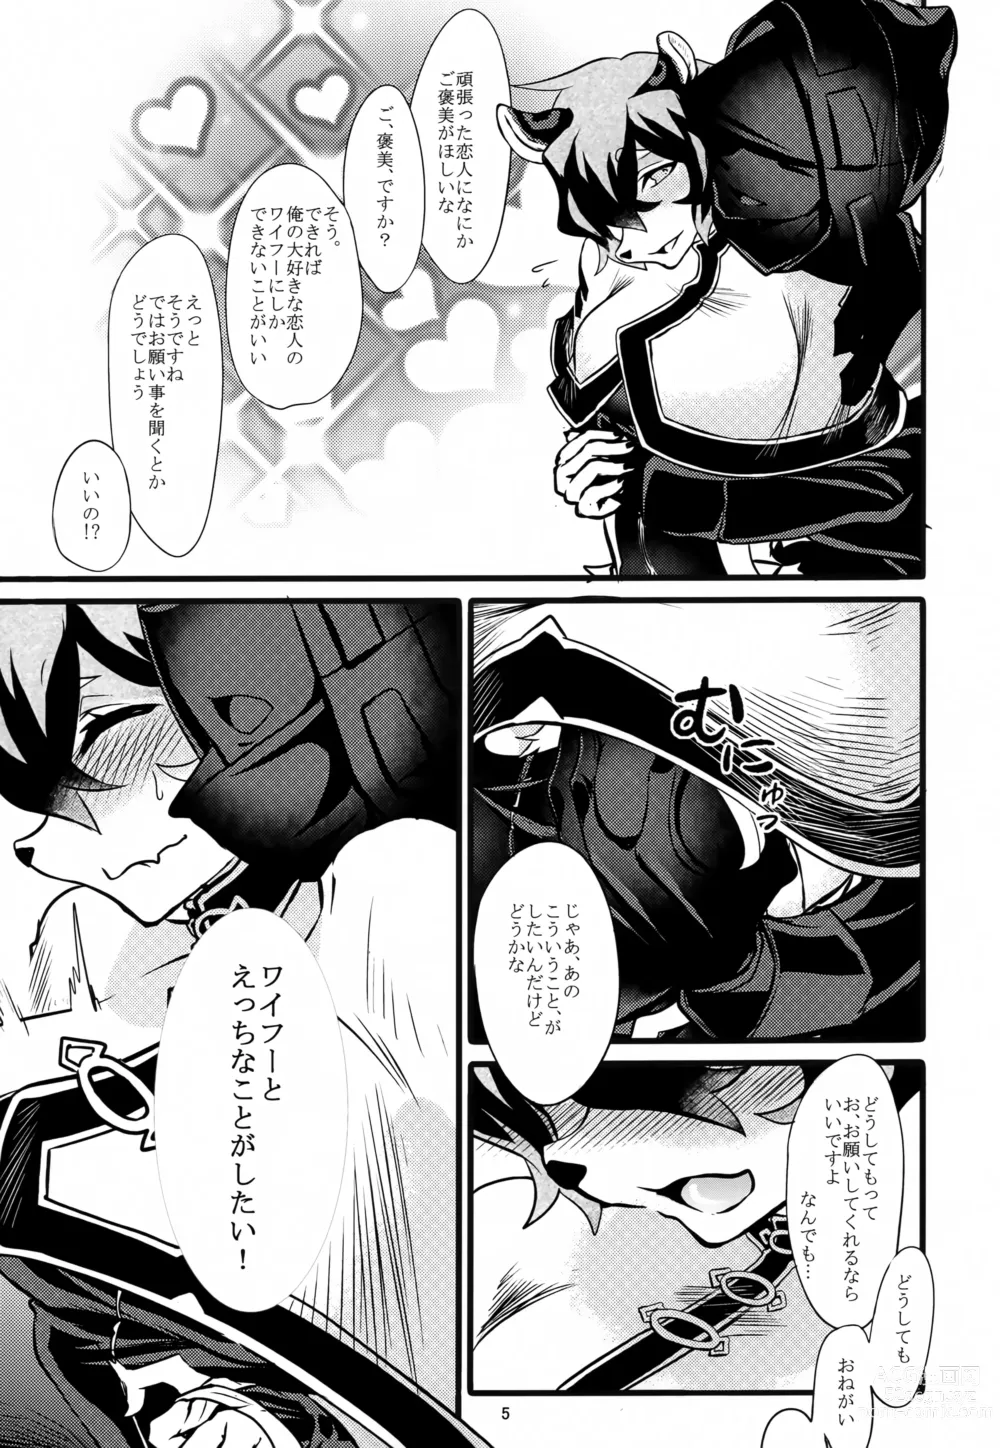 Page 5 of doujinshi Rhodes Gift